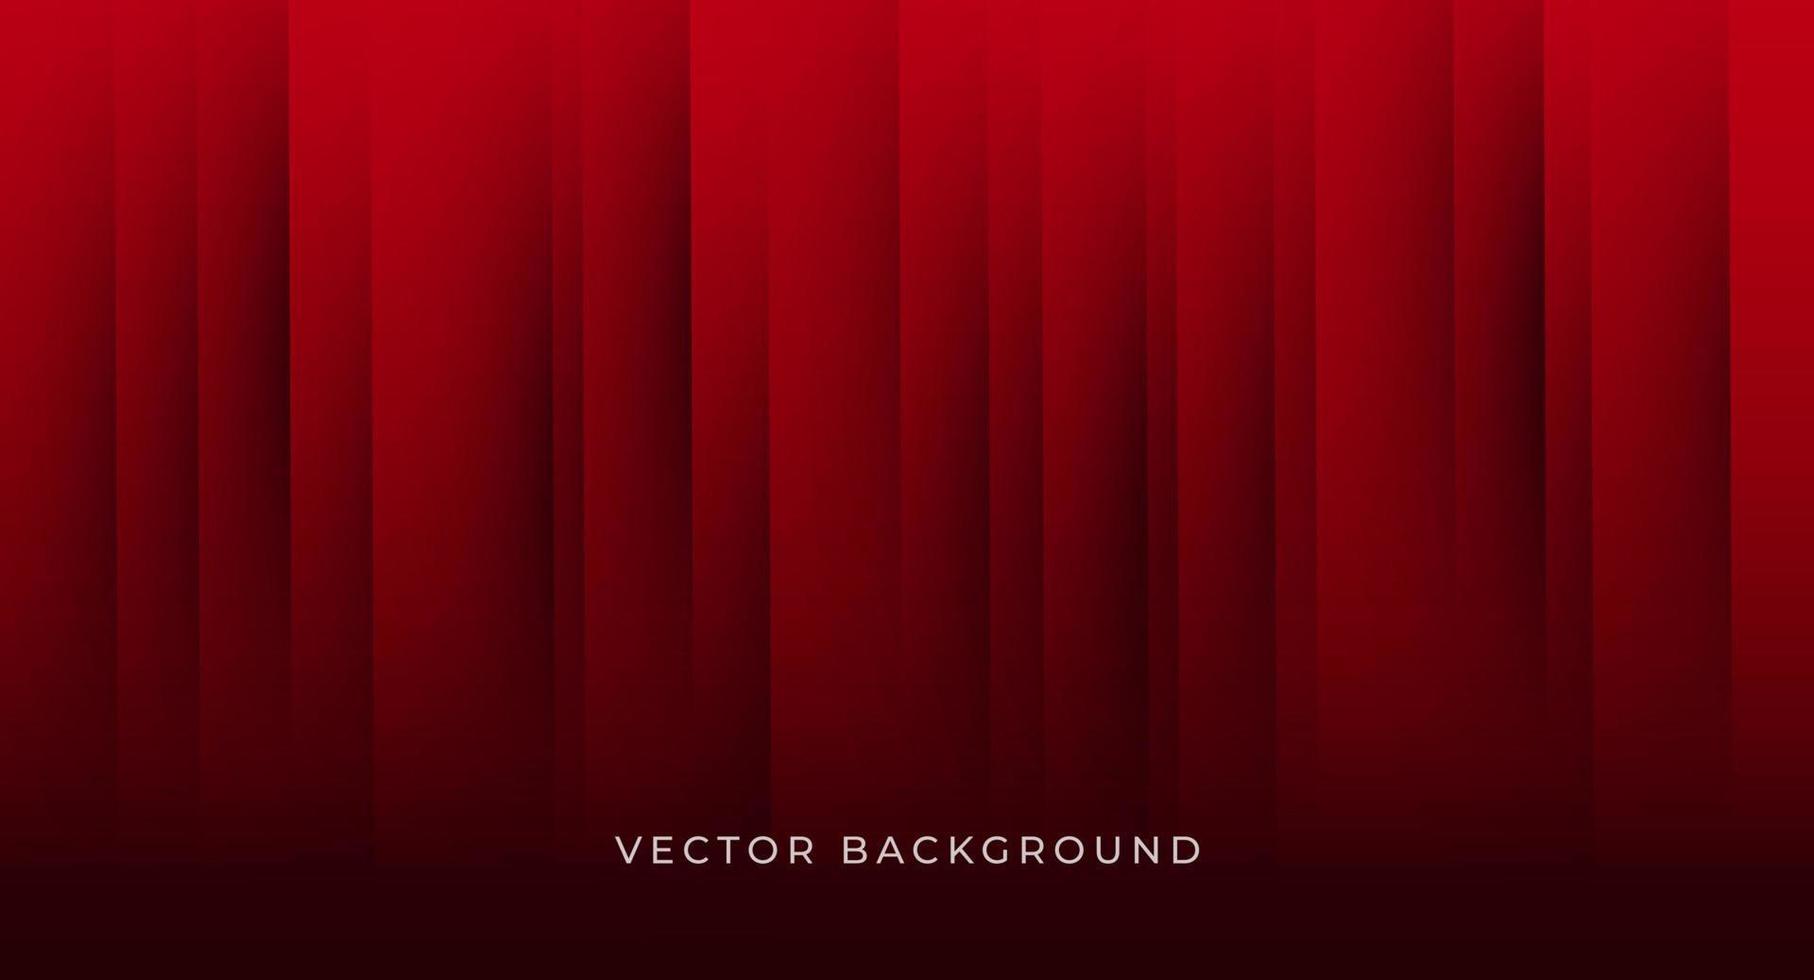 Abstract luxury elegant red background Vector illustration